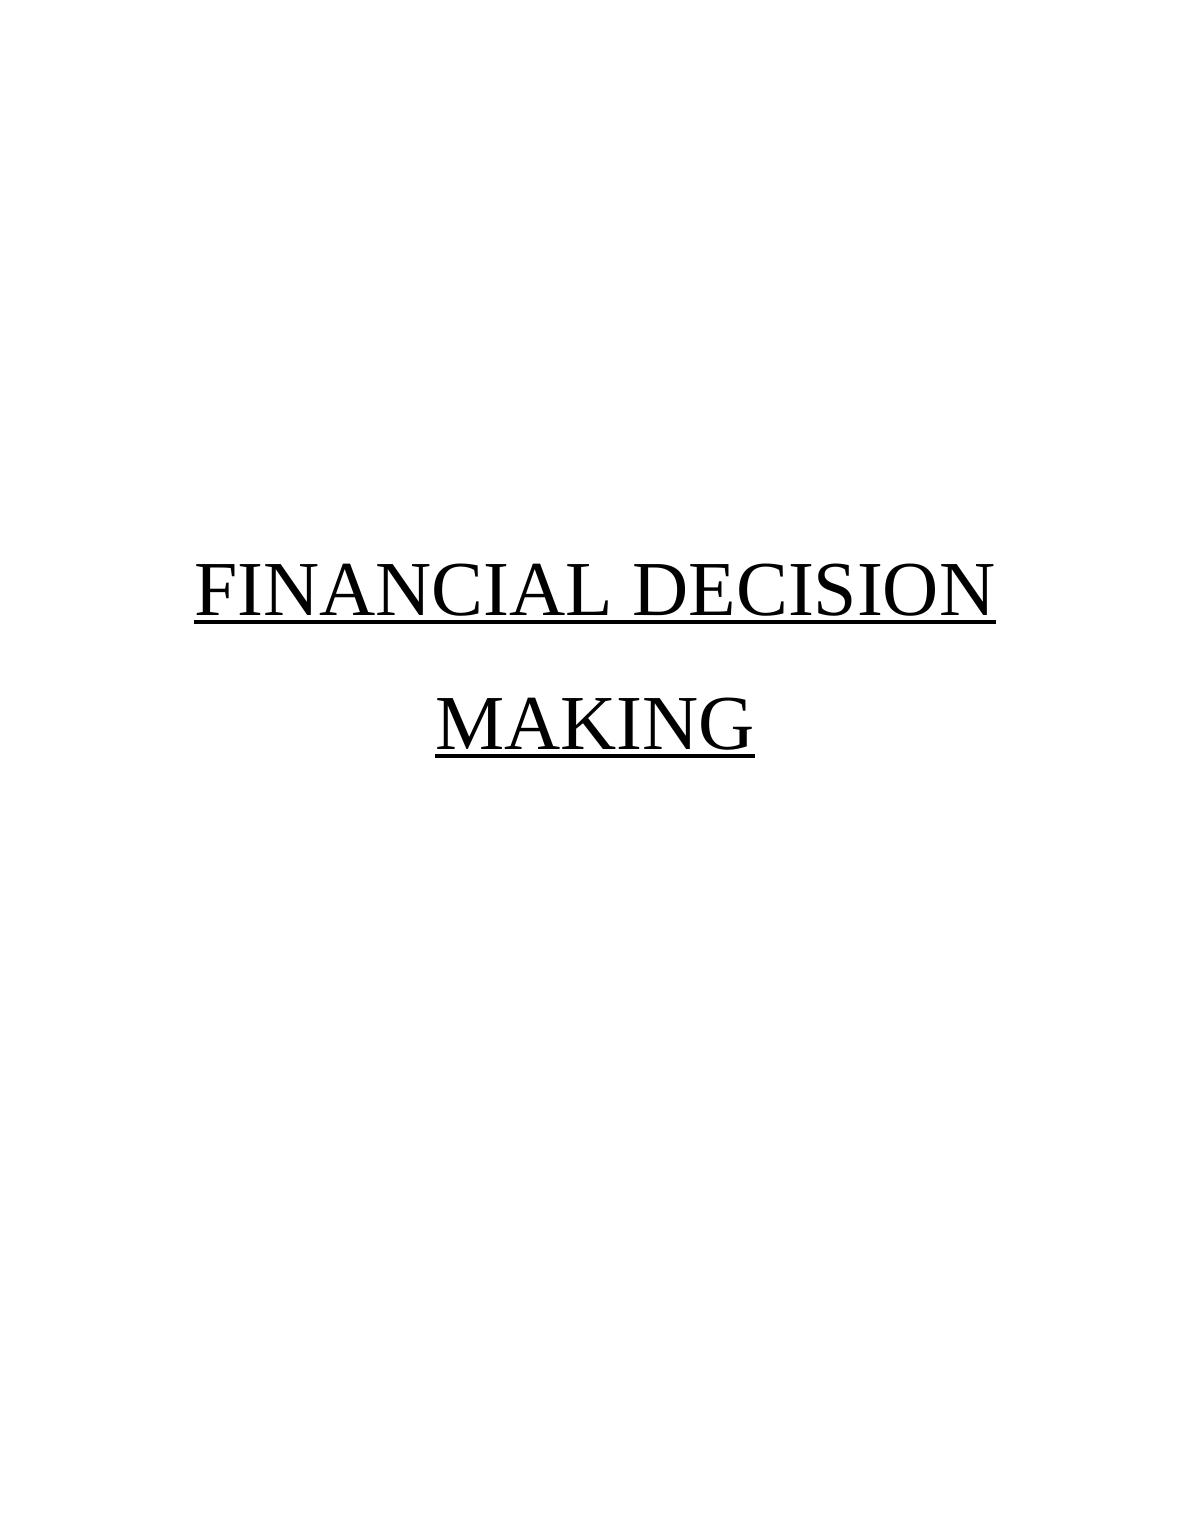 AM803001 - Financial Decision Making Assignment_1